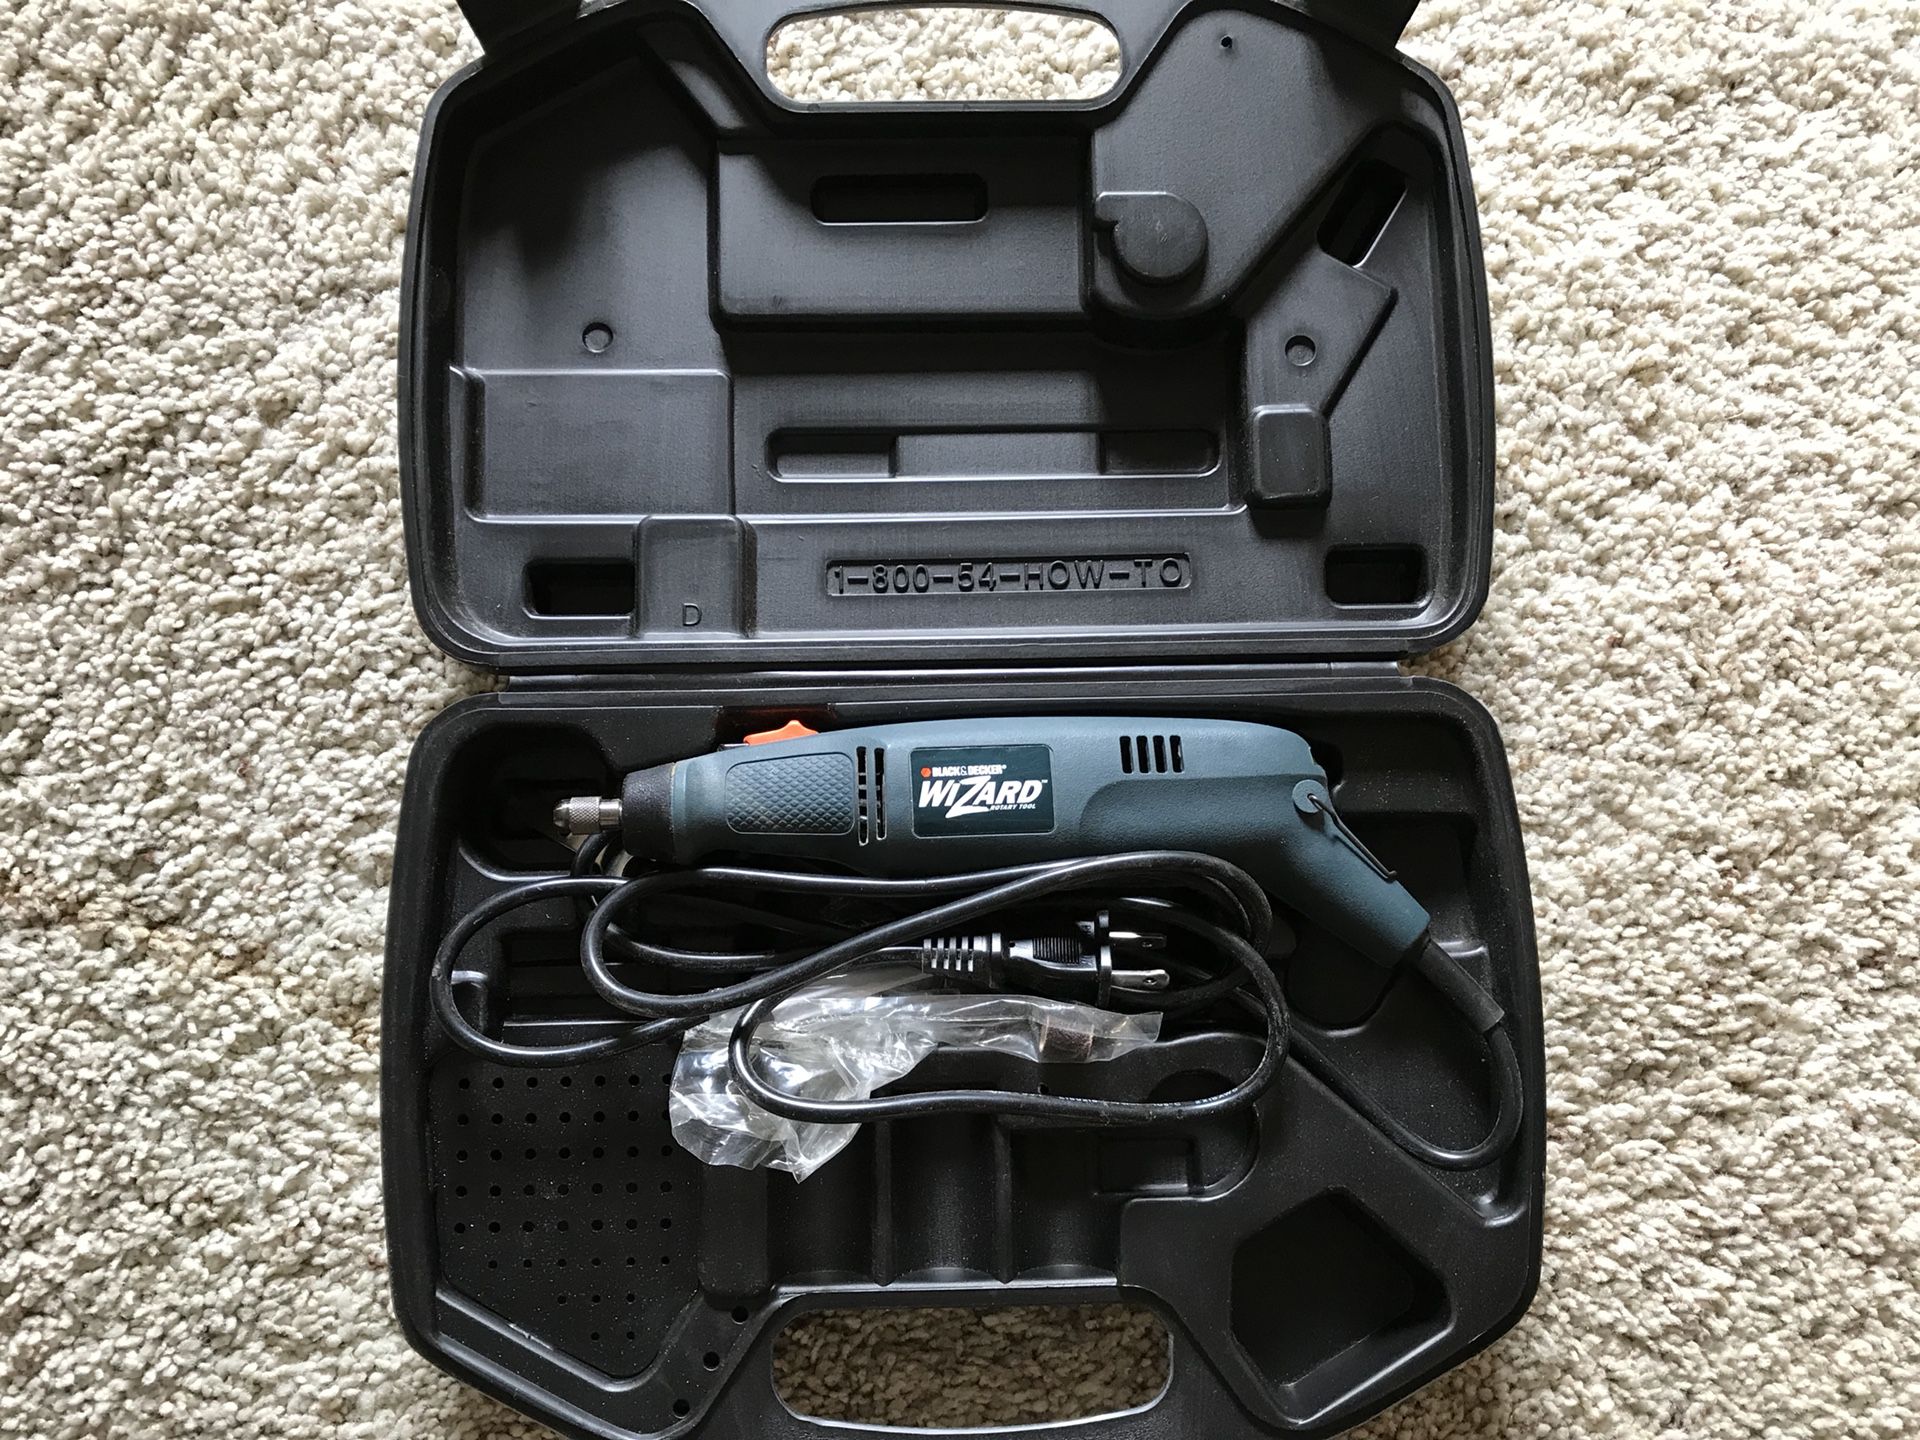 Black and Decker Wizard Rotary Tool